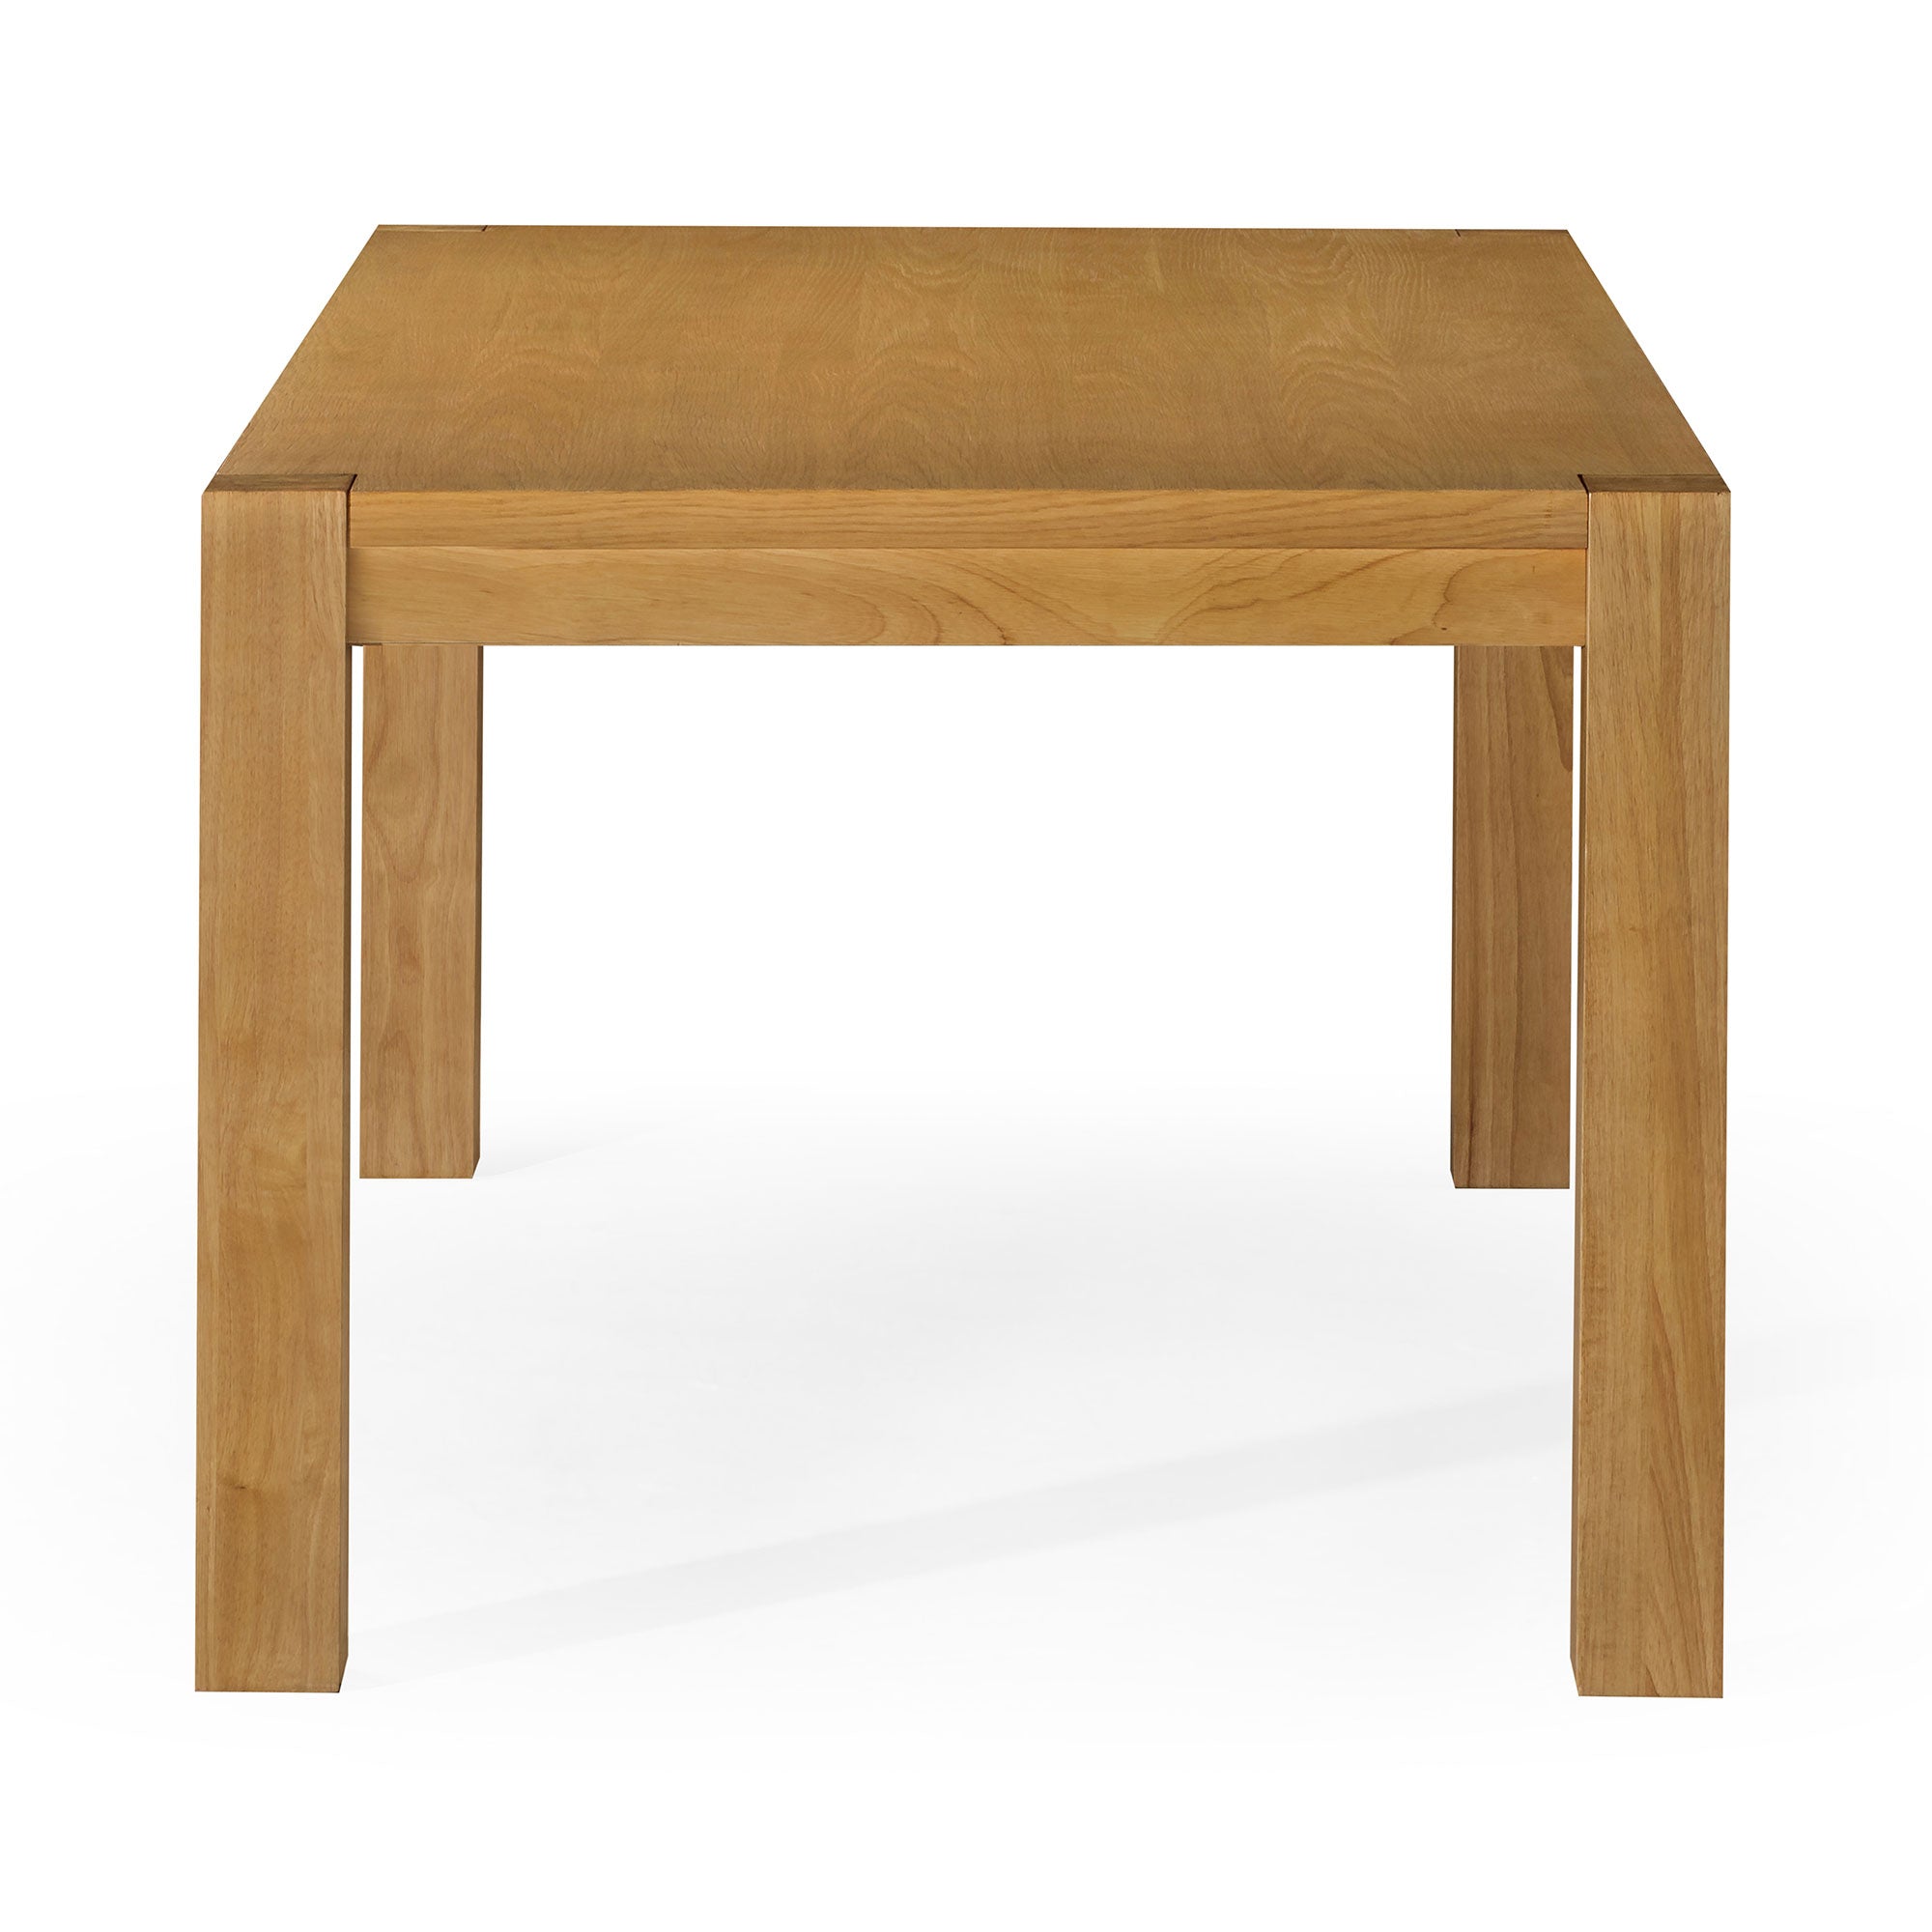 Cleo Contemporary Wooden Dining Table in Refined Natural Finish in Dining Furniture by Maven Lane